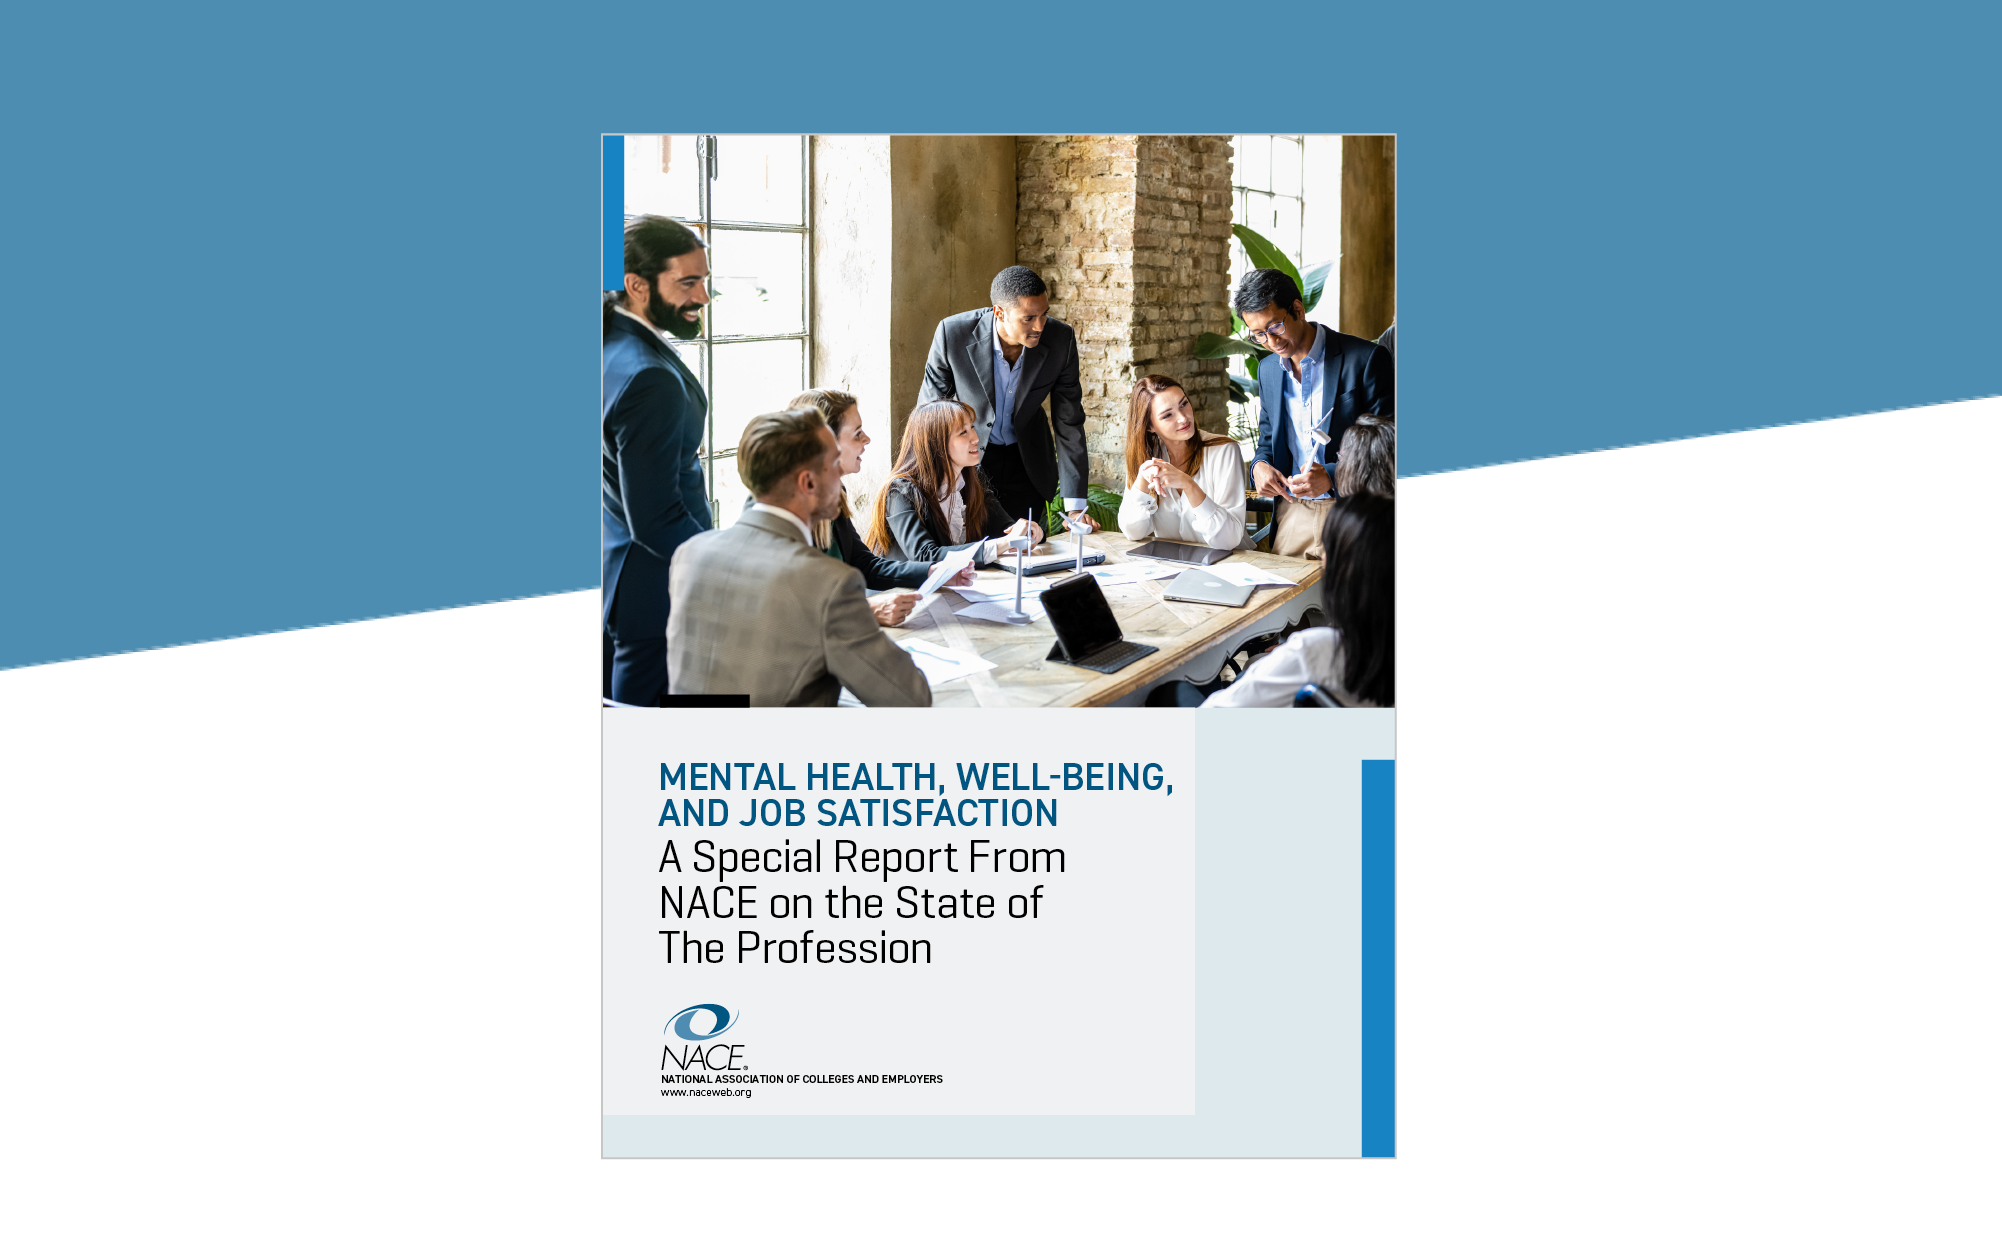 Mental Health, Well-Being, and Job Satisfaction: A Special Report From NACE